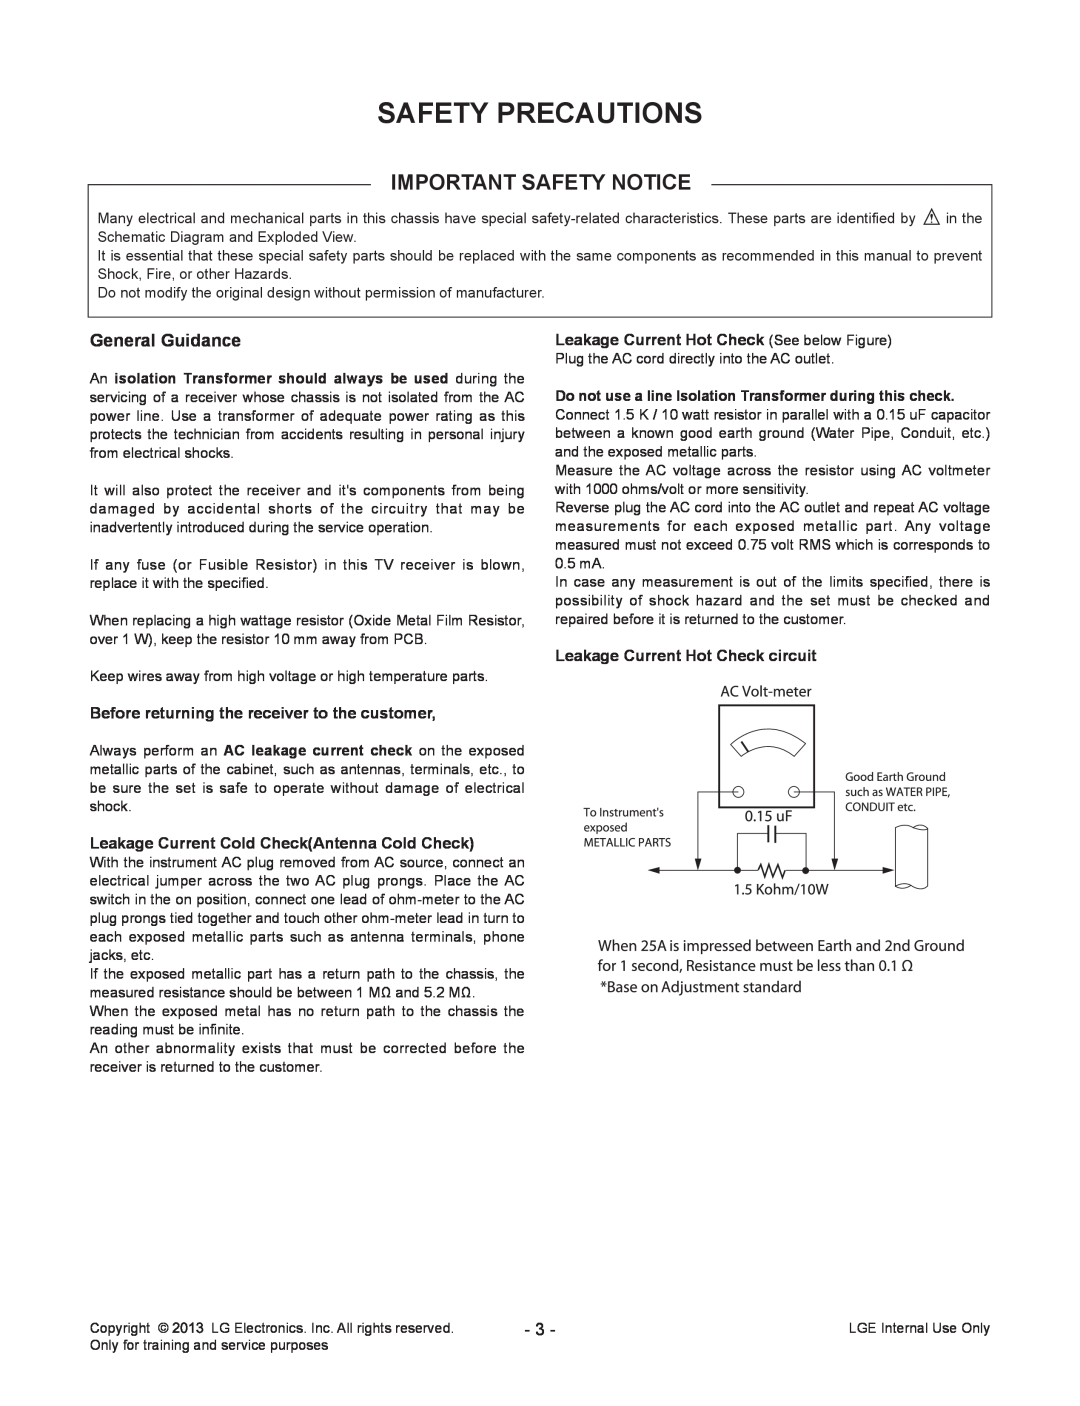 LG Electronics 55LA625C-ZA Safety Precautions, General Guidance, Before returning the receiver to the customer 